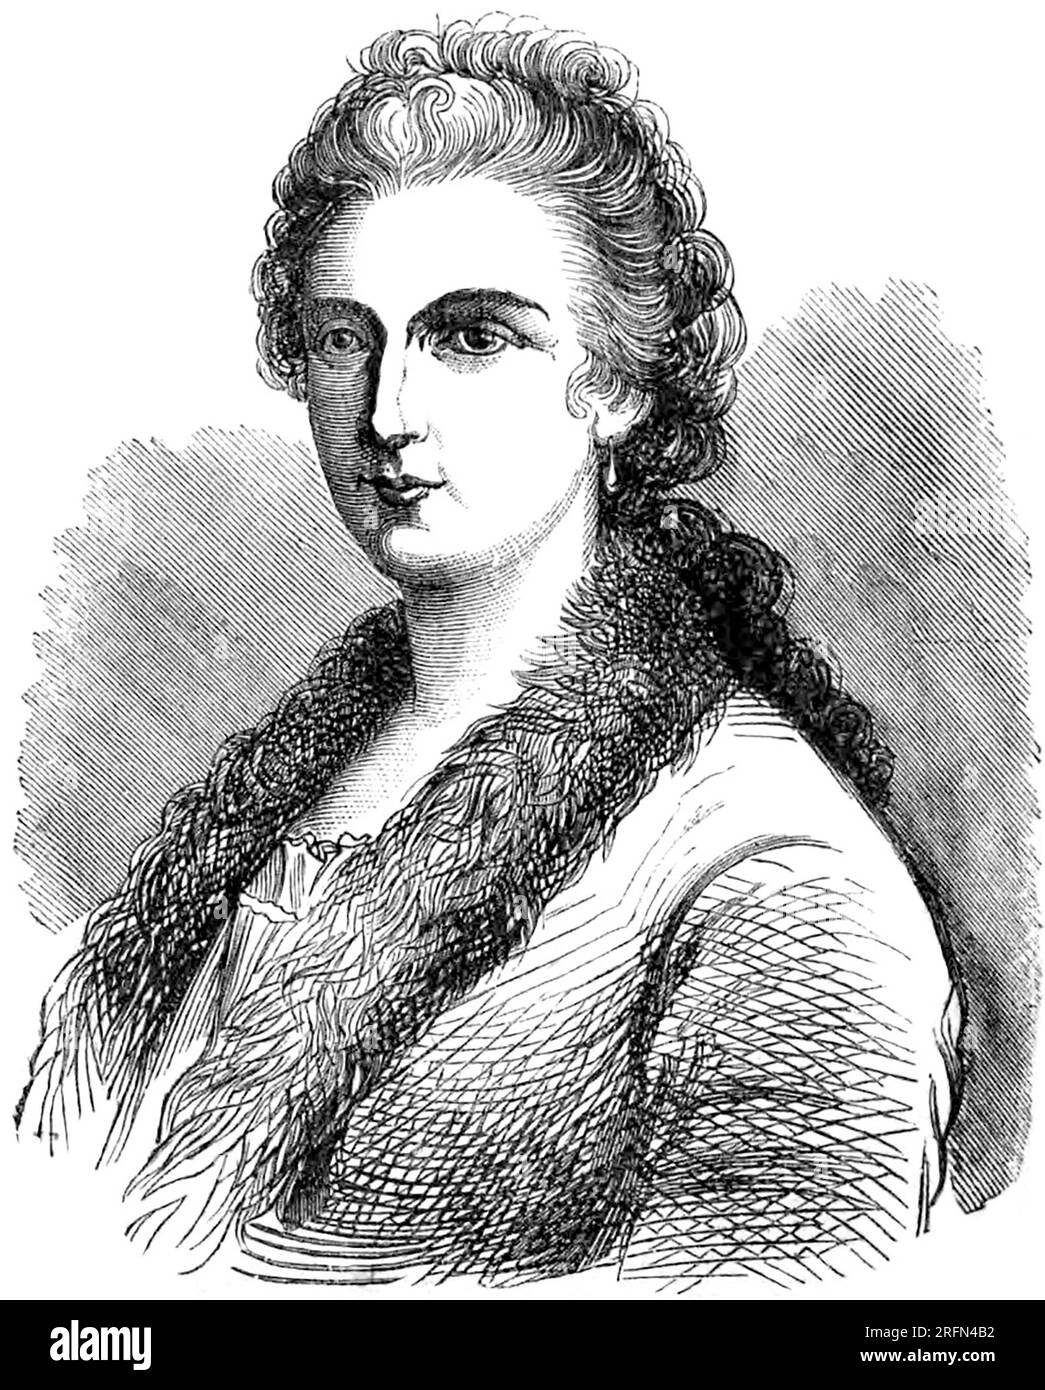 Portrait of Maria Gaetana Agnesi (1718-1799), Italian mathematician and philosopher, who was the first woman to write a mathematics handbook and the first female math professor at a university. She is known for her work in differential calculus and on the cubic curve known as the 'witch of Agnesi.' Eugenio Camerini, circa mid-19th century. Stock Photo